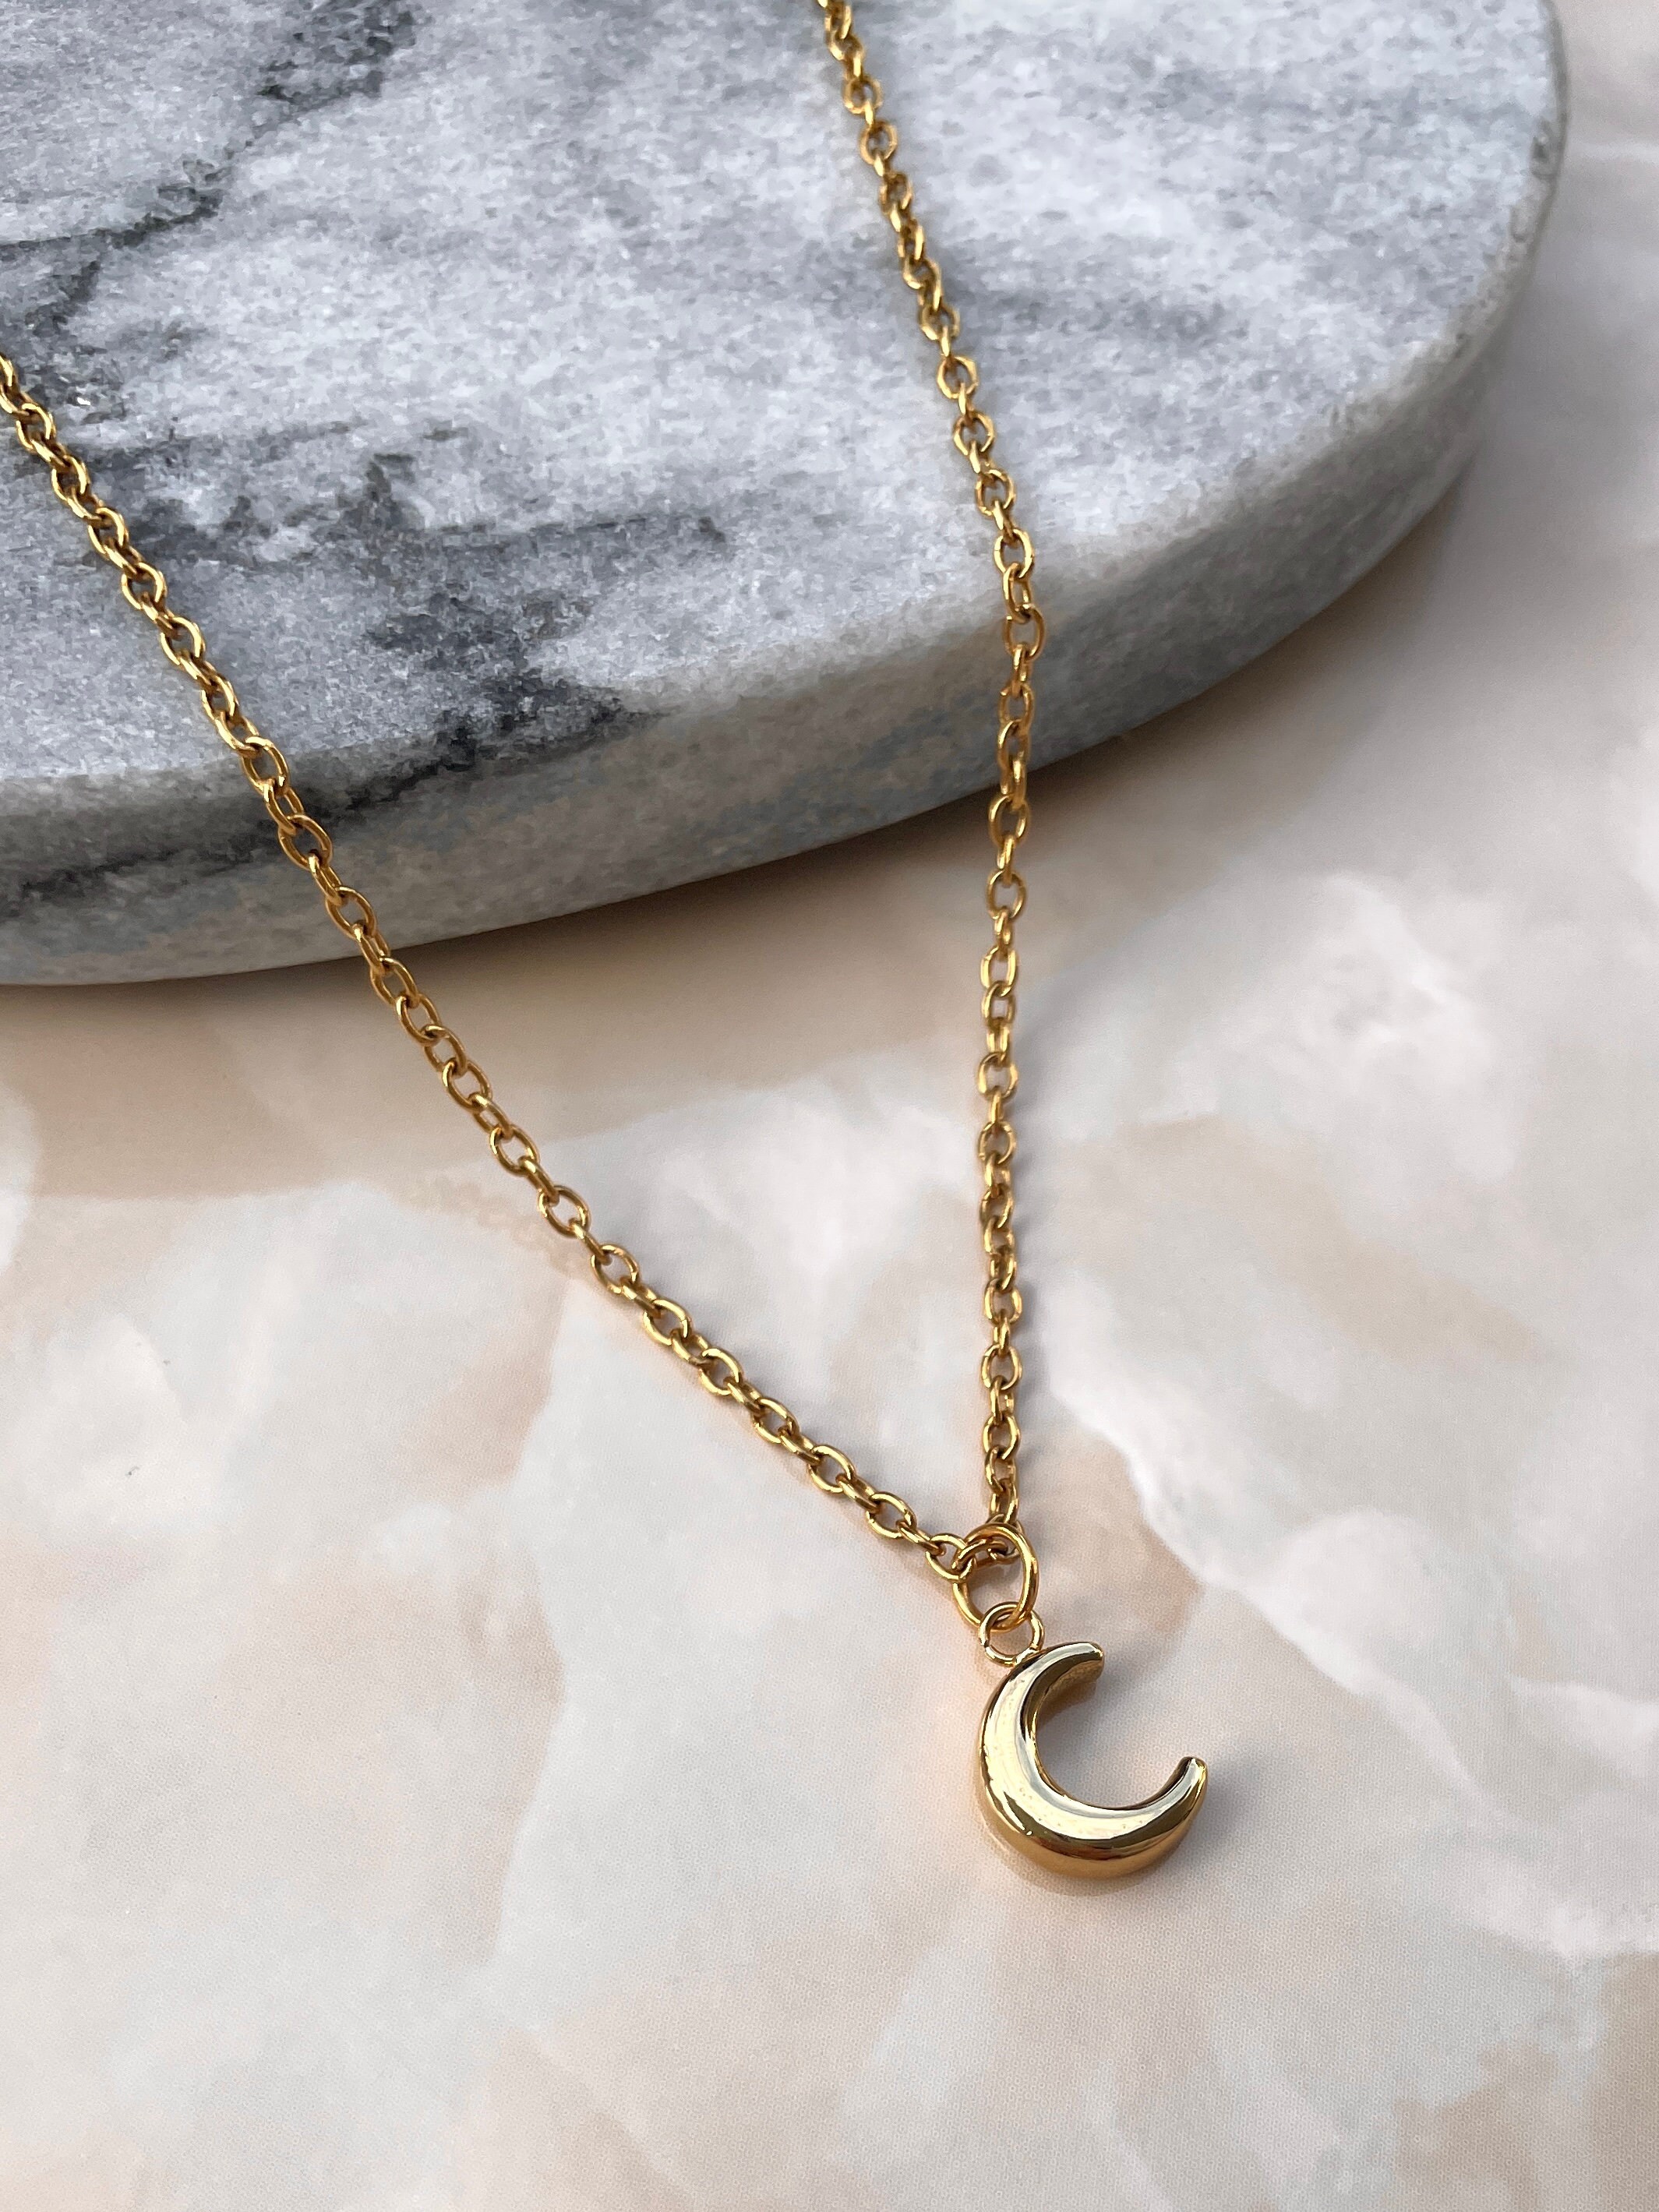 Crescent Moon and Star Celestial Necklet Torc in Sterling Silver or  Gold-Plated, Moon Neck Ring, Artisan Choker Style Necklace